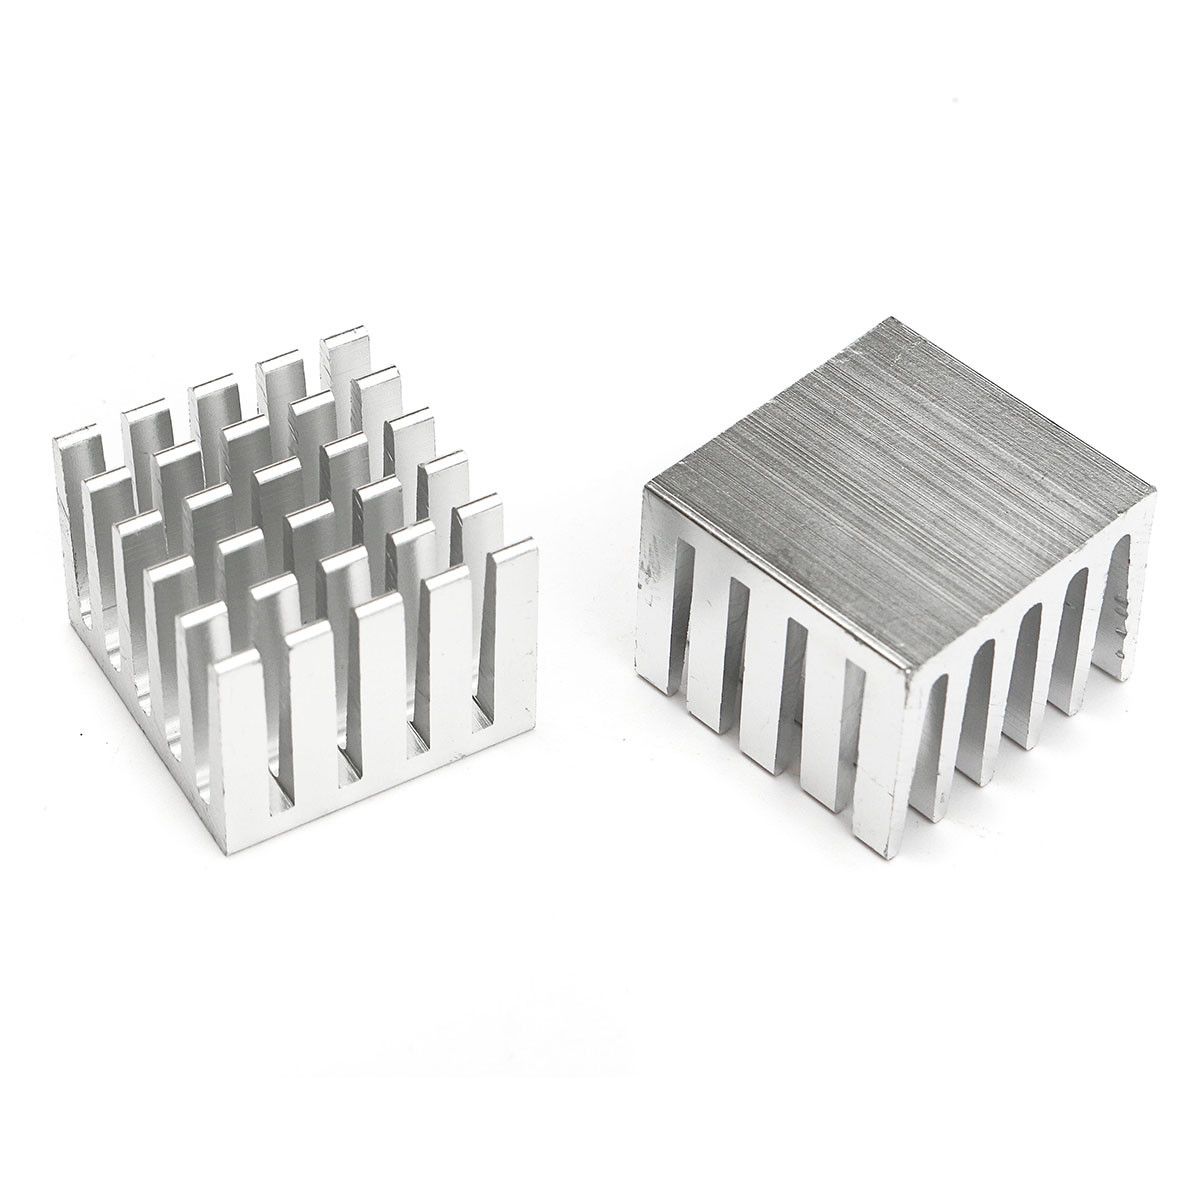 Find 1pcs 20x20x15mm DIY CPU IC Chip Heat Sink Extruded Cooler Aluminum Heat Sink for Sale on Gipsybee.com with cryptocurrencies